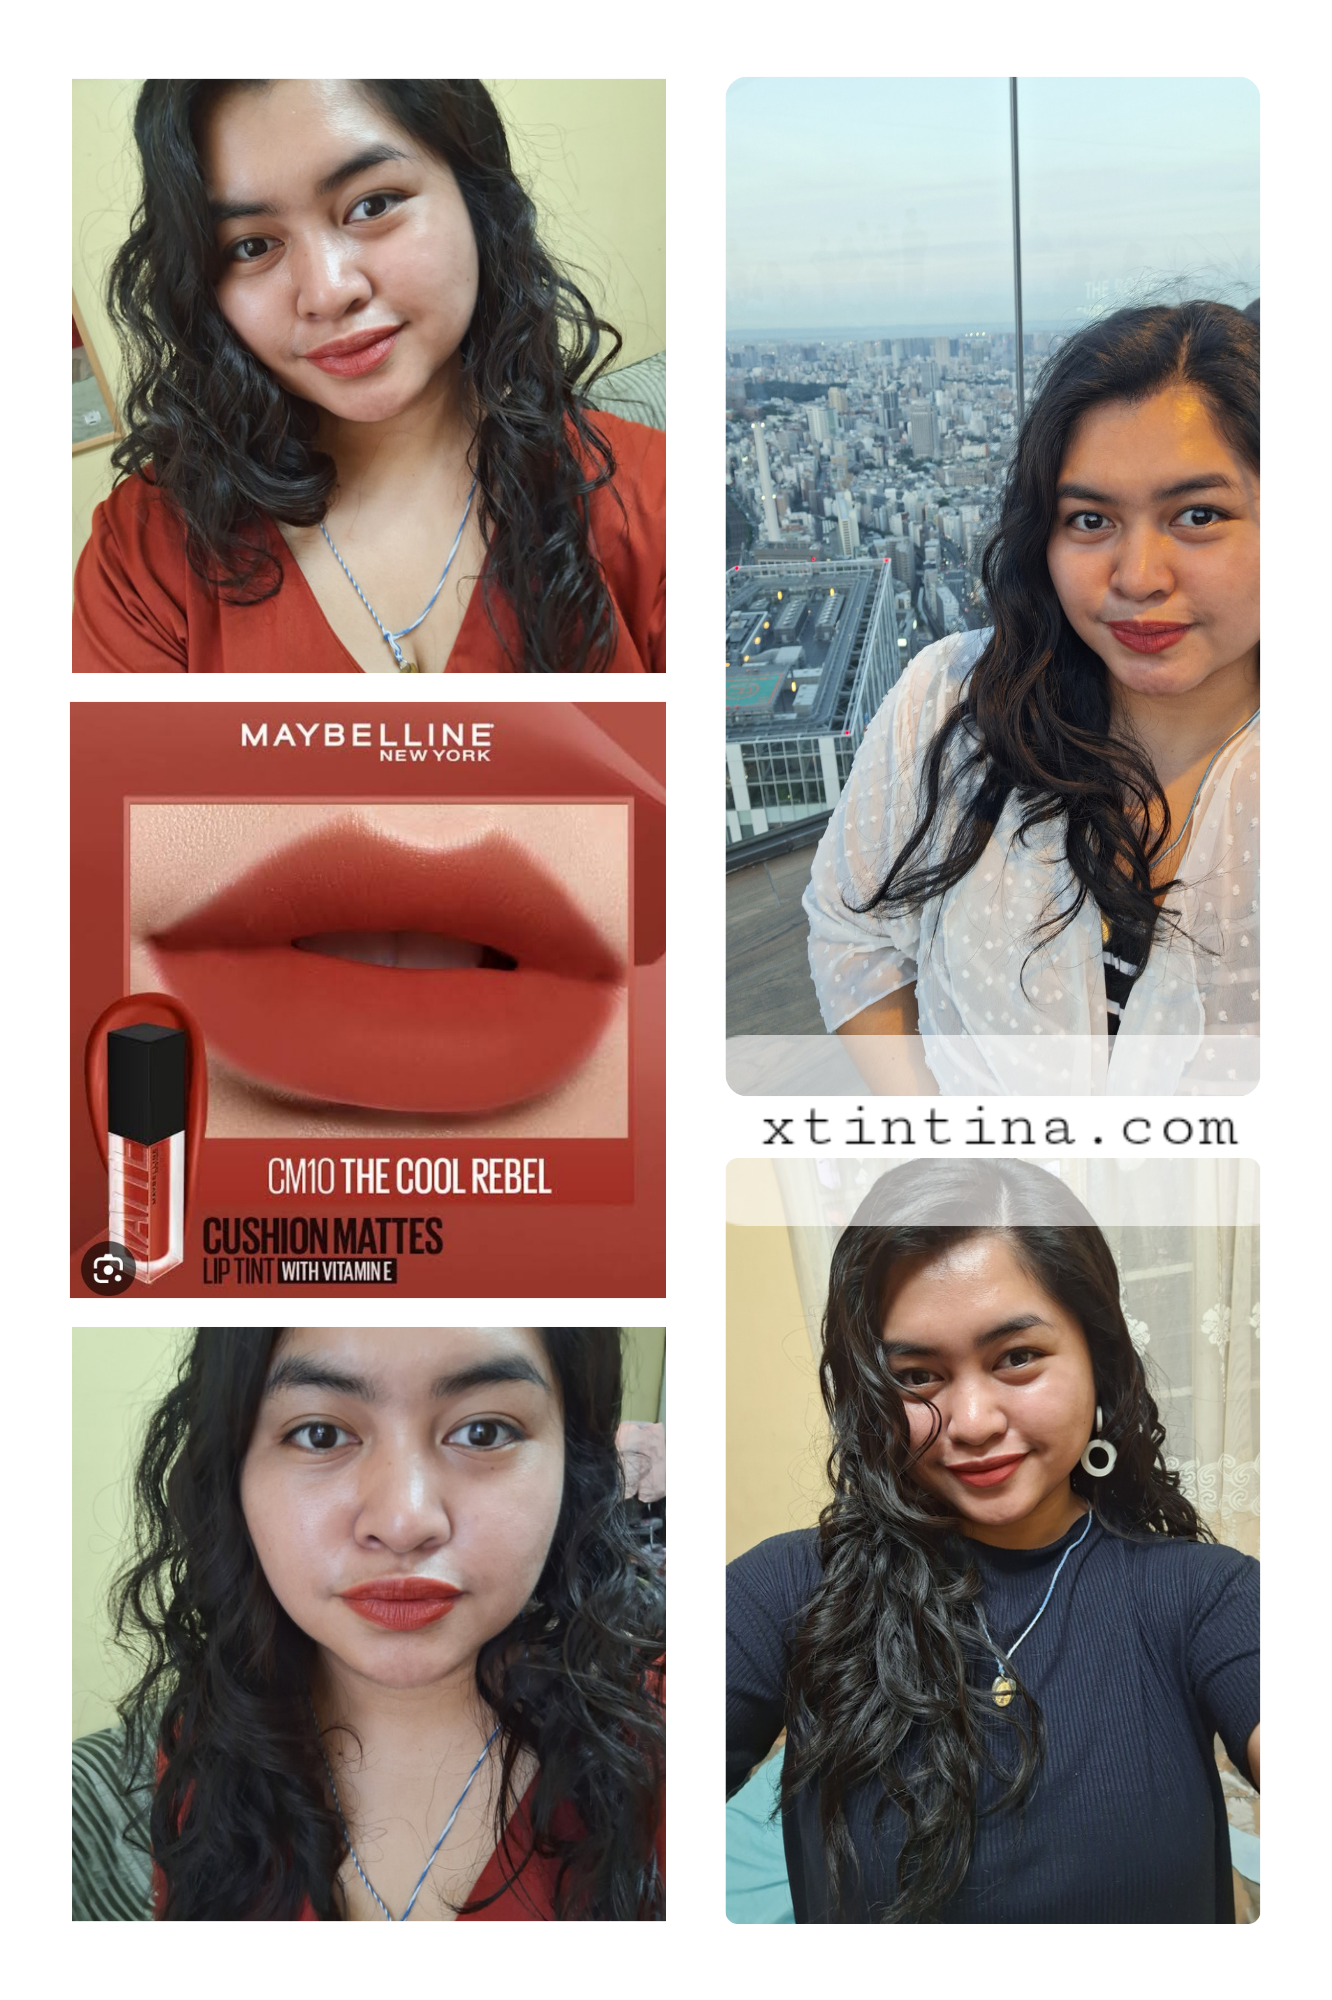 Maybelline Cushion Matte The Cool Rebel